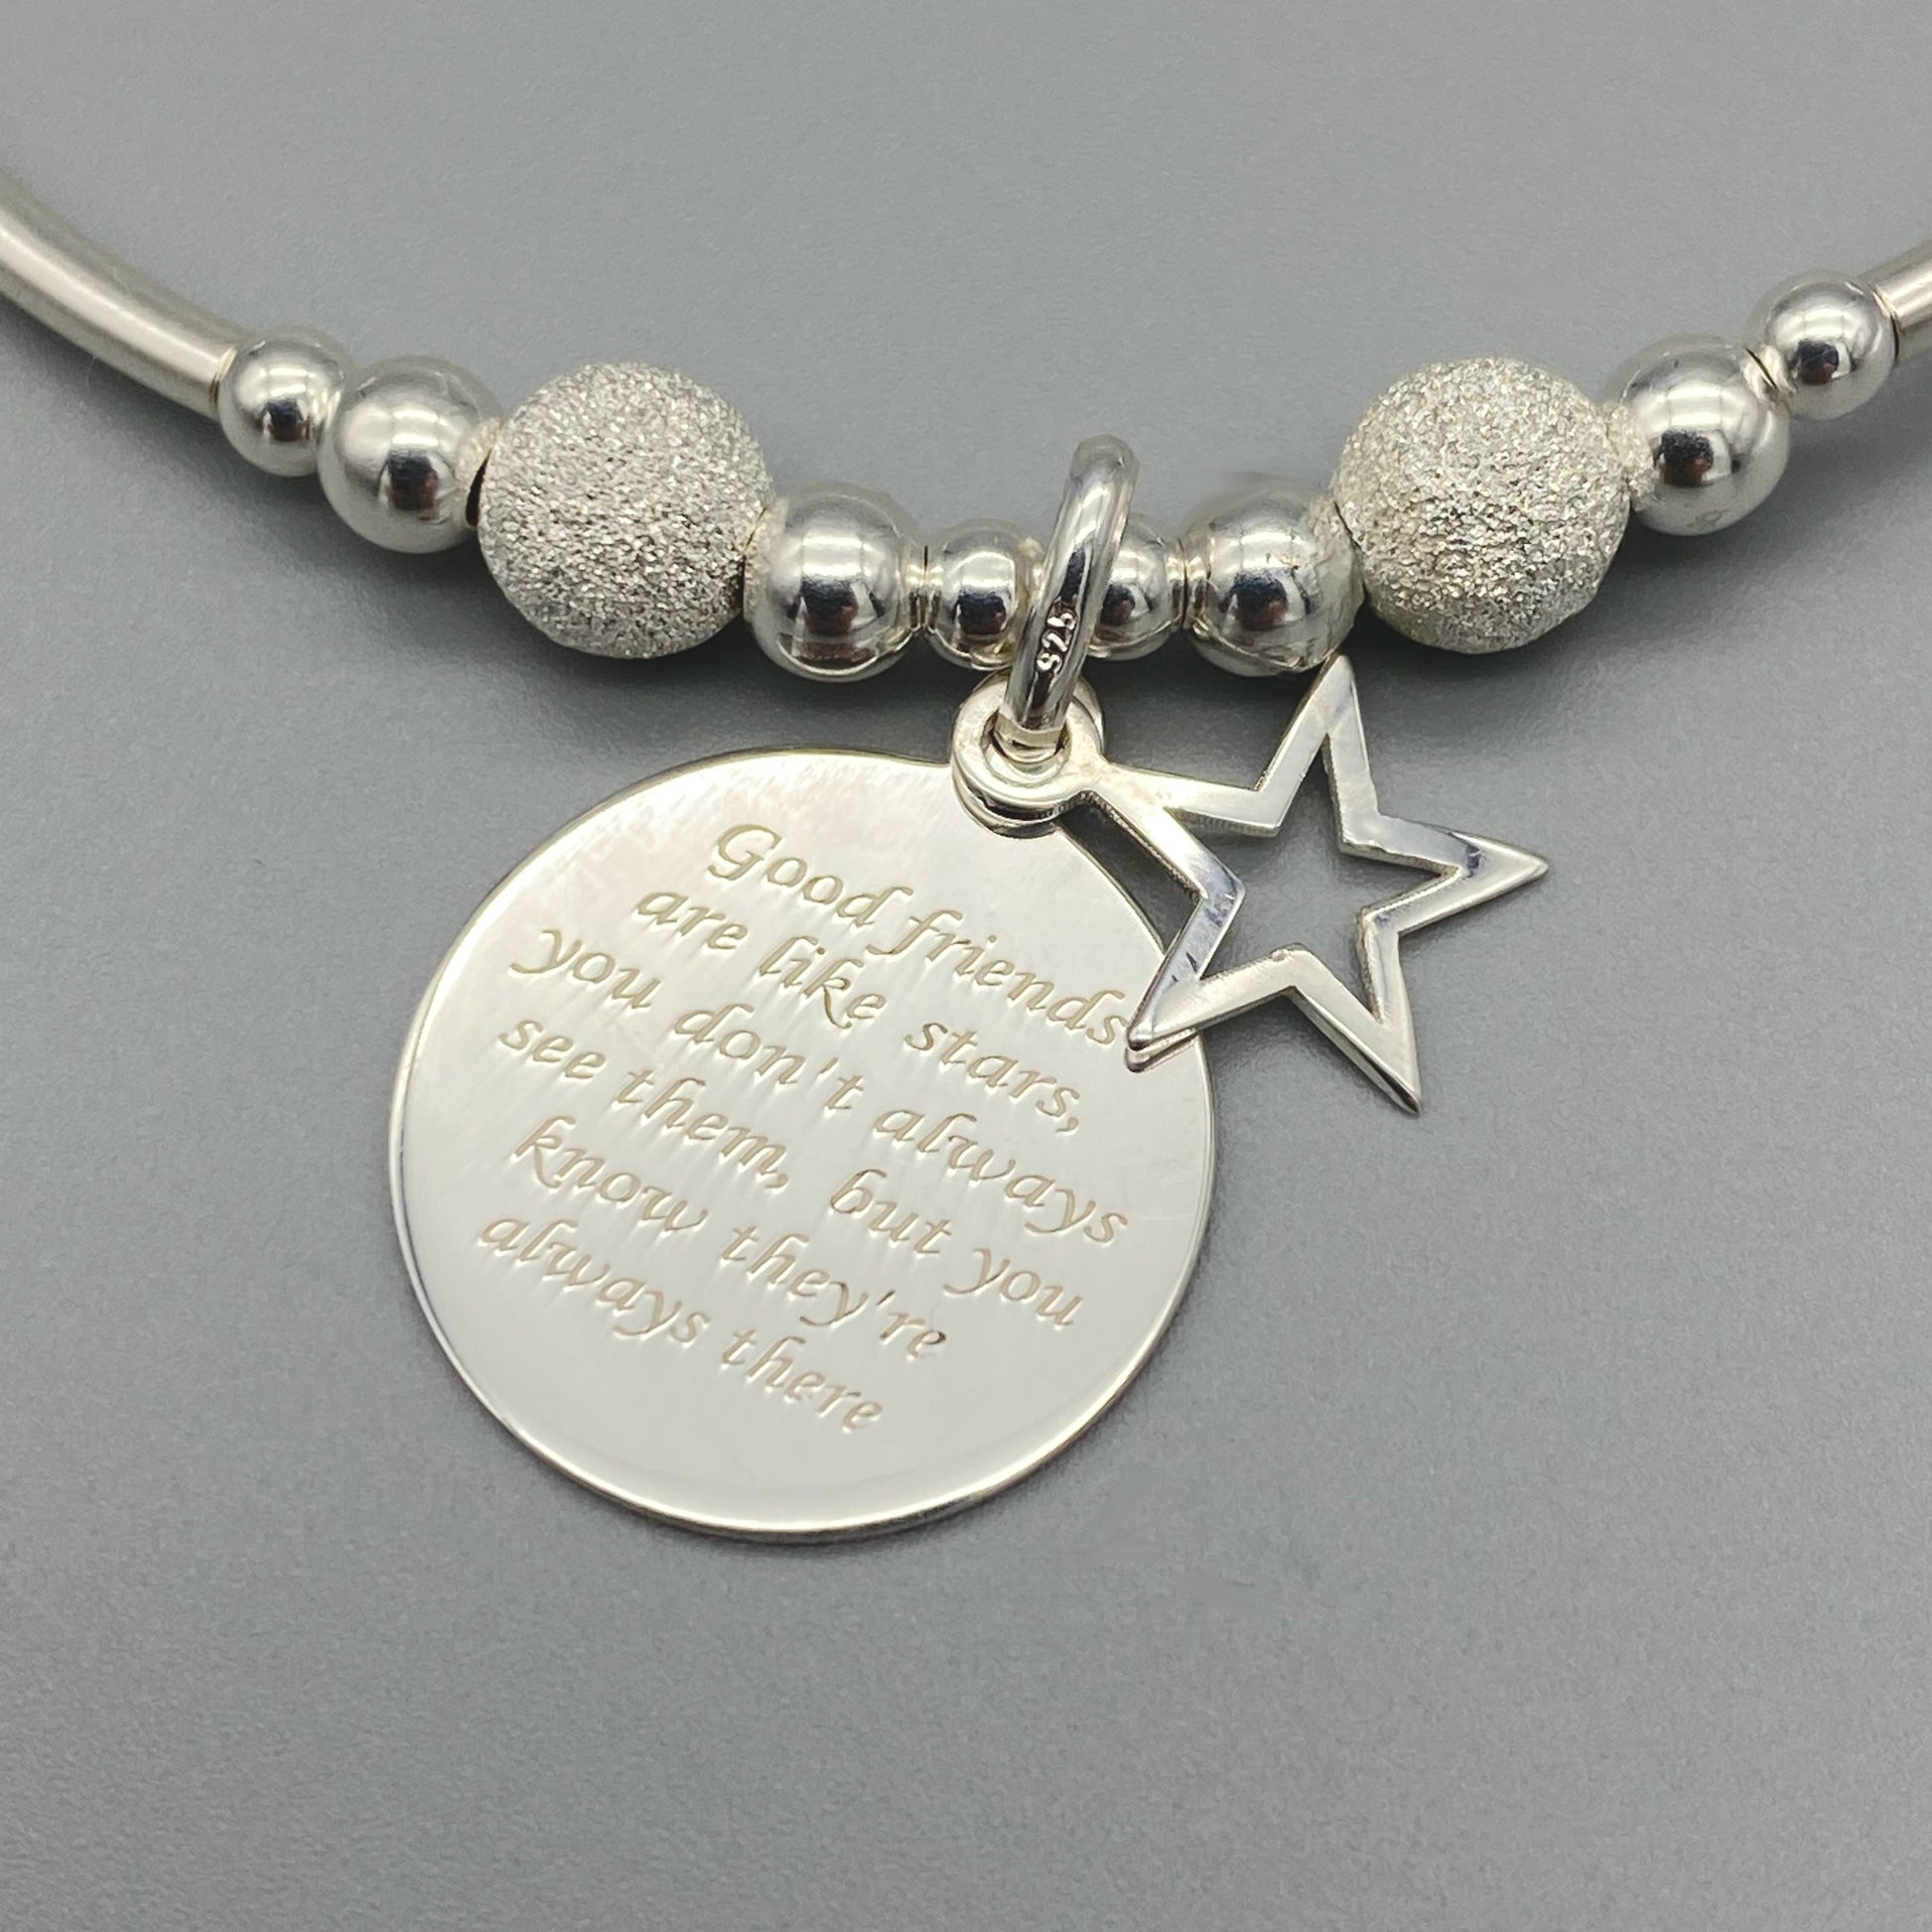 Closeup of "Good friends are like stars..." sterling silver stacking bracelet for her by My Silver Wish